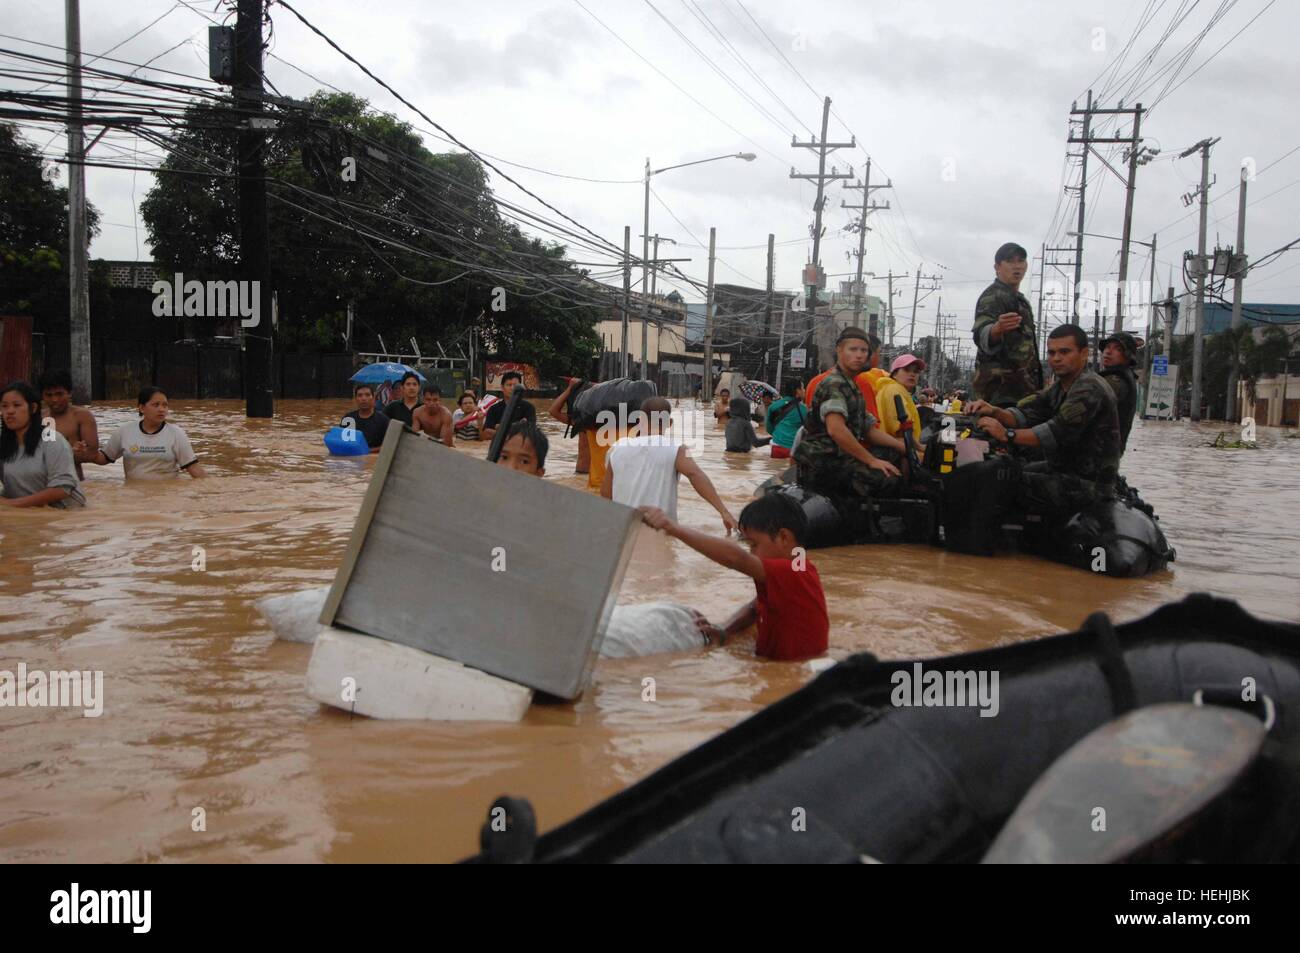 U.S. Navy SEAL soldiers rescue local residents from flood waters after flooding destroyed homes and displaced thousands of people September 17, 2007 in Manila, Philippines. Stock Photo